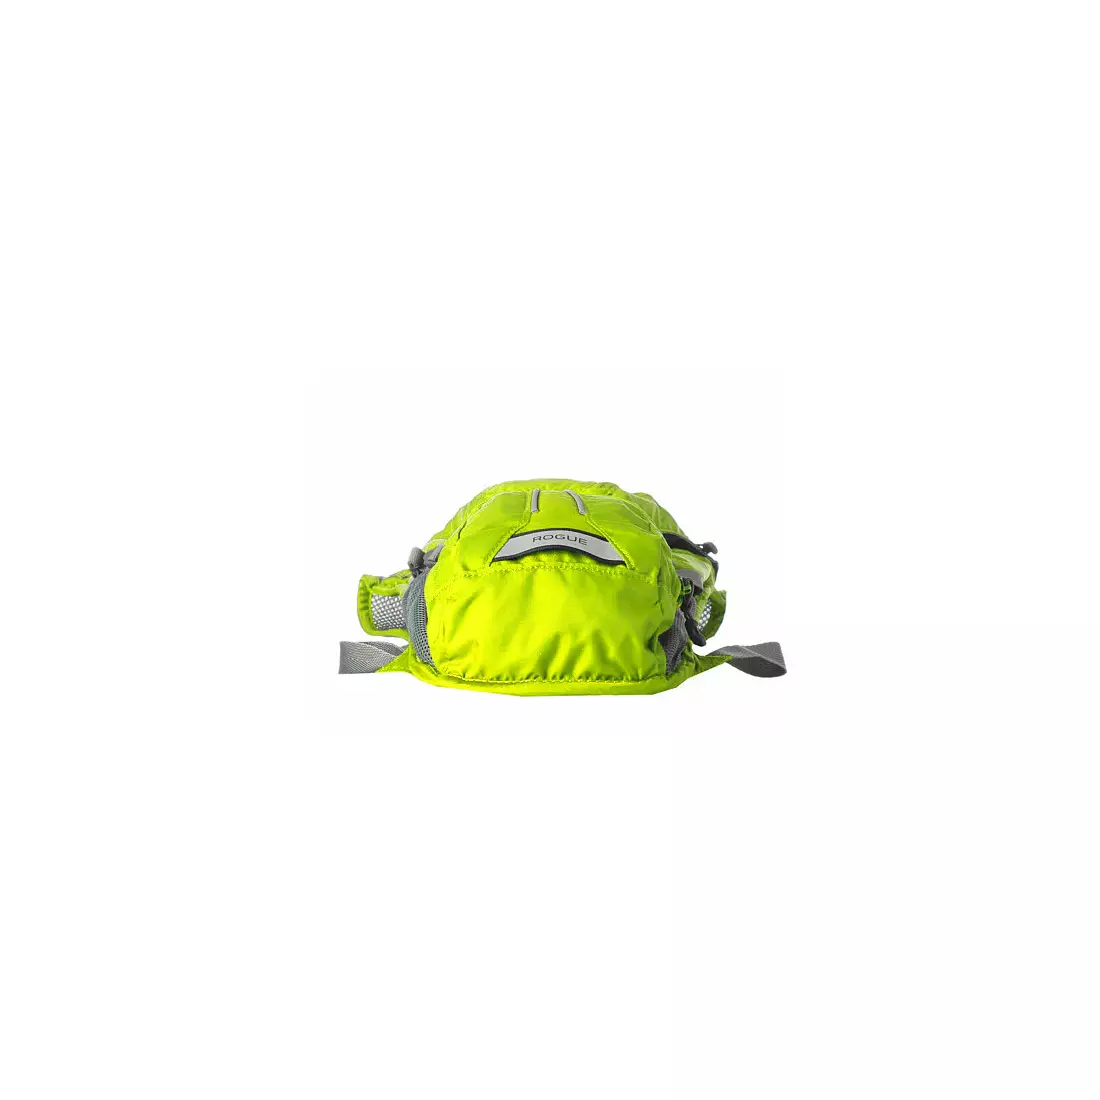 CAMELBAK backpack with water bladder Rogue 70 oz / 2L Lemon Green INTL 62242-IN SS16